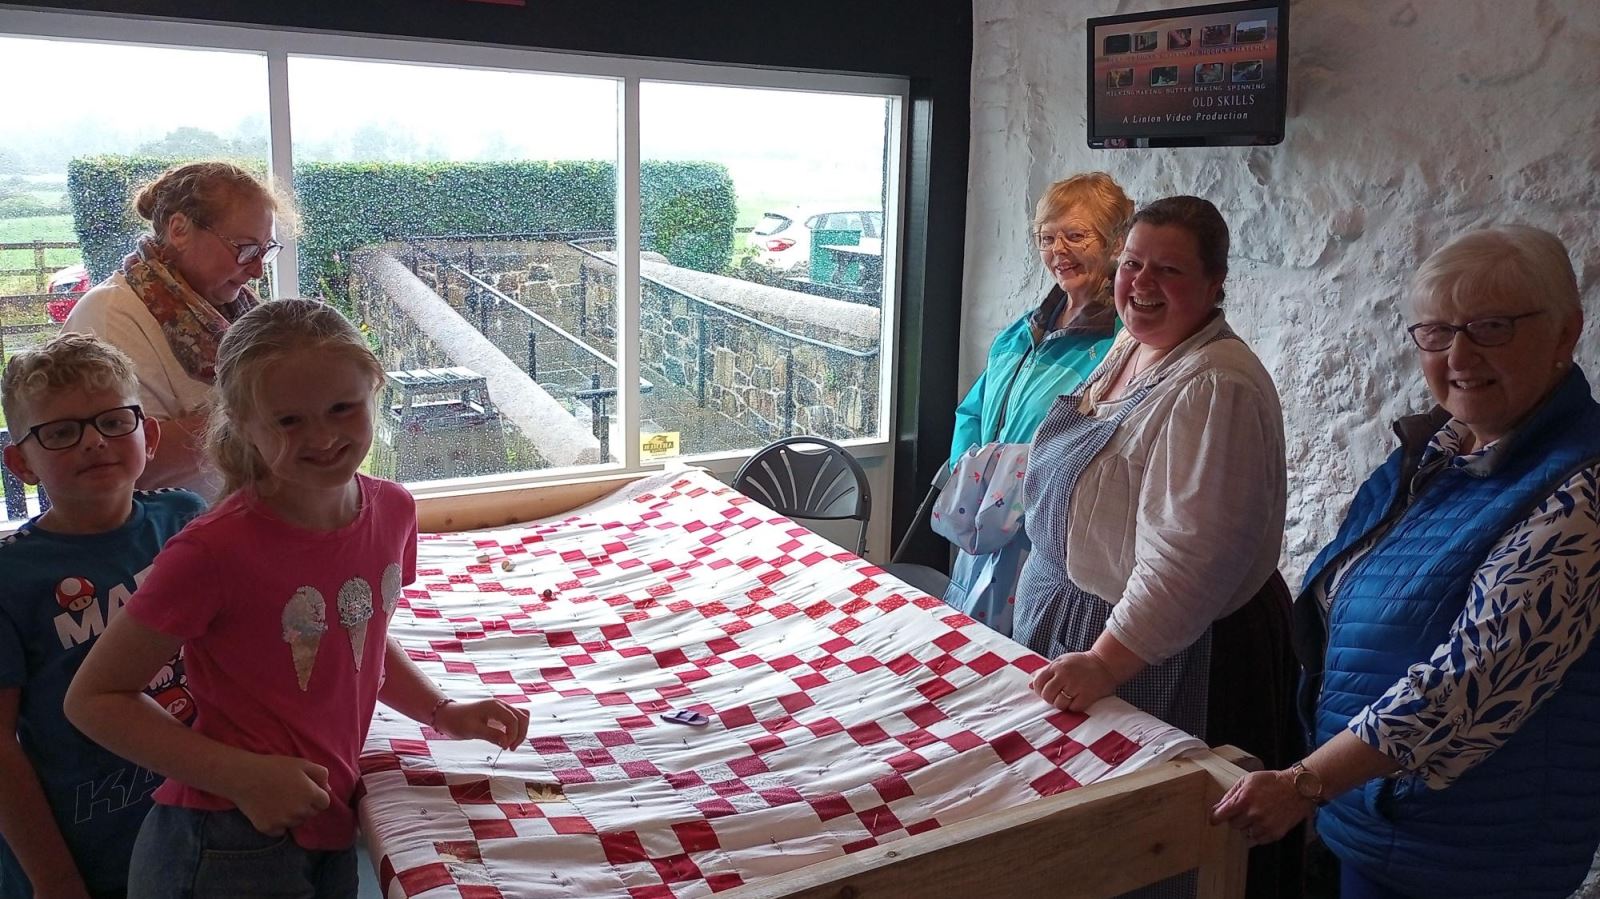 People standing round the quilting table